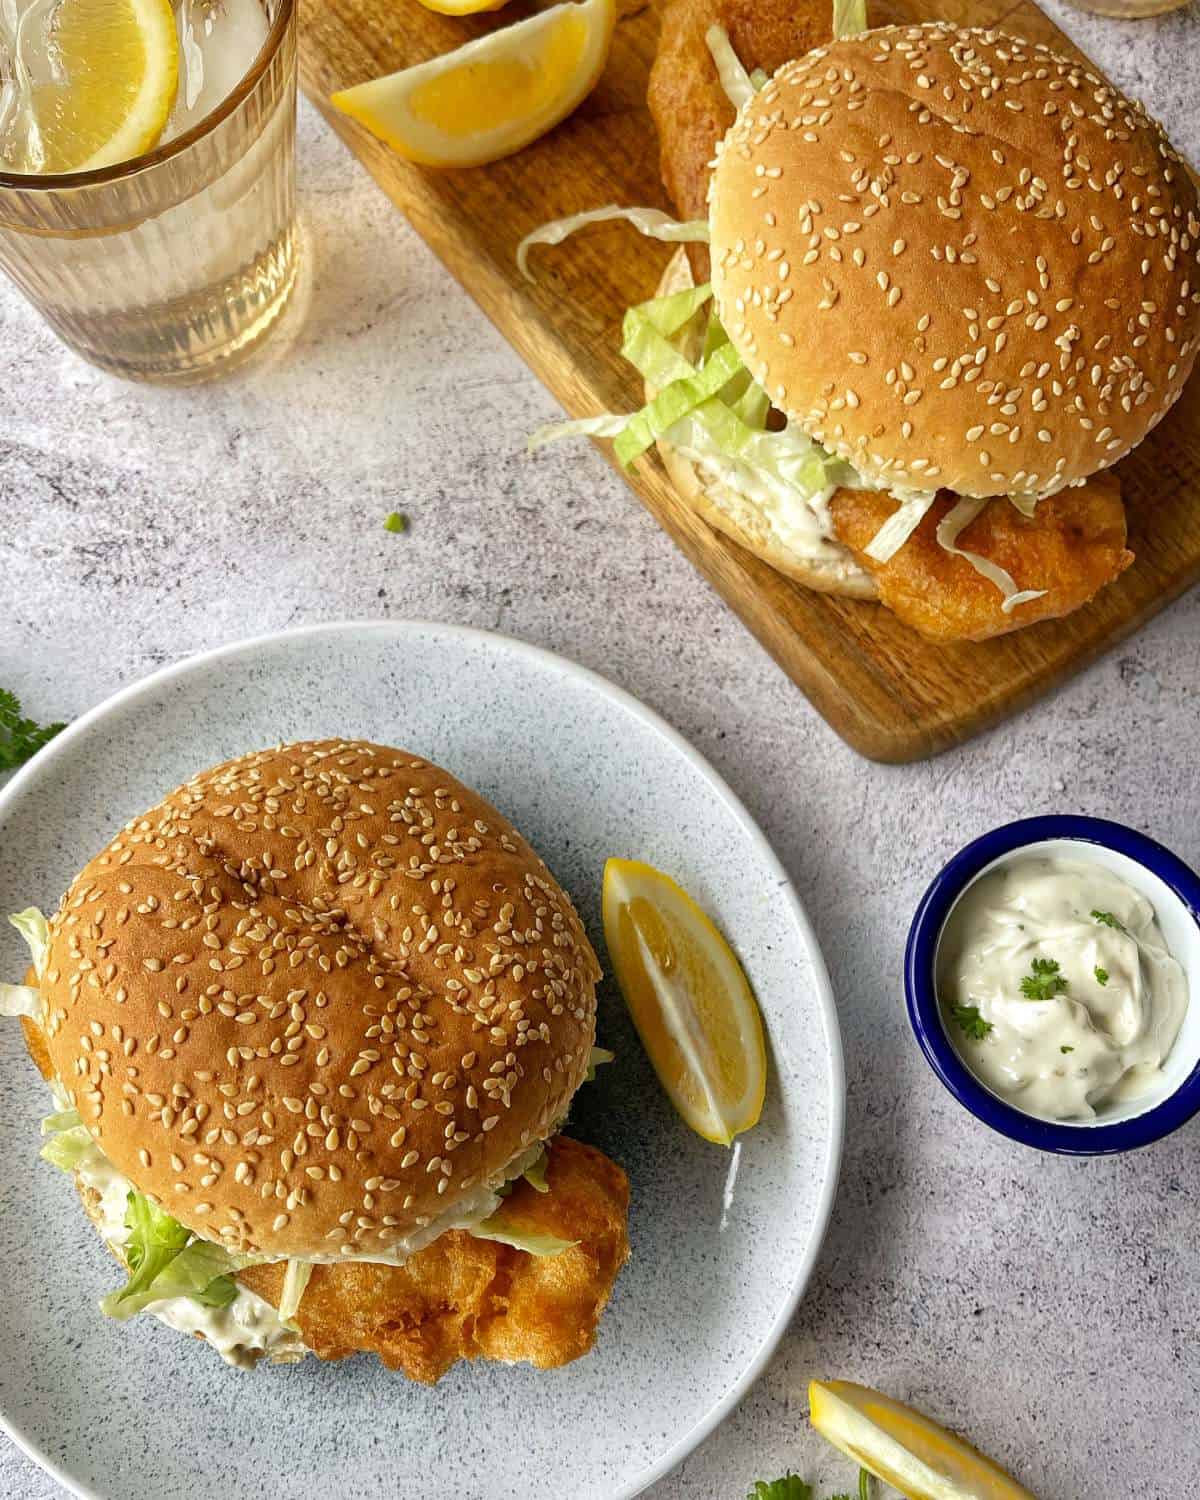 One battered fish burger served on a duckegg blue plate with another burger on a wooden chopping board in the background.